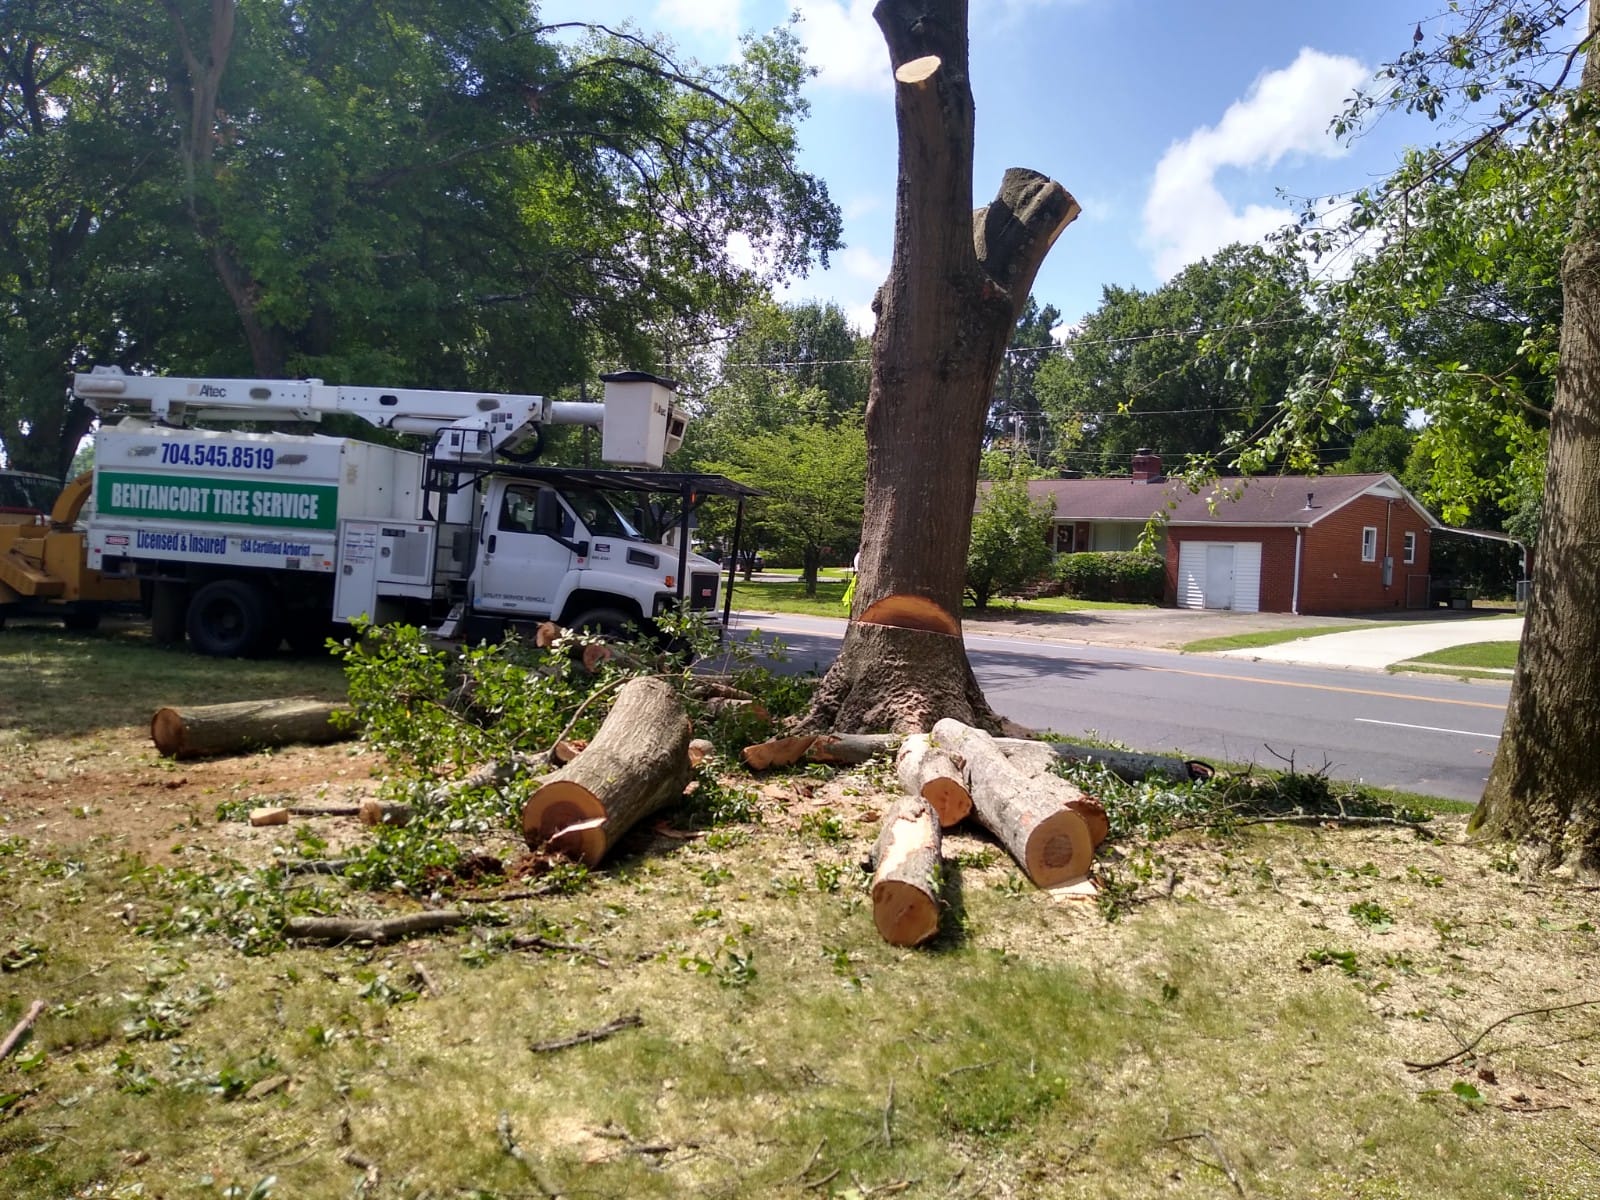 tree removal in charlotte nc - bentancort tree service